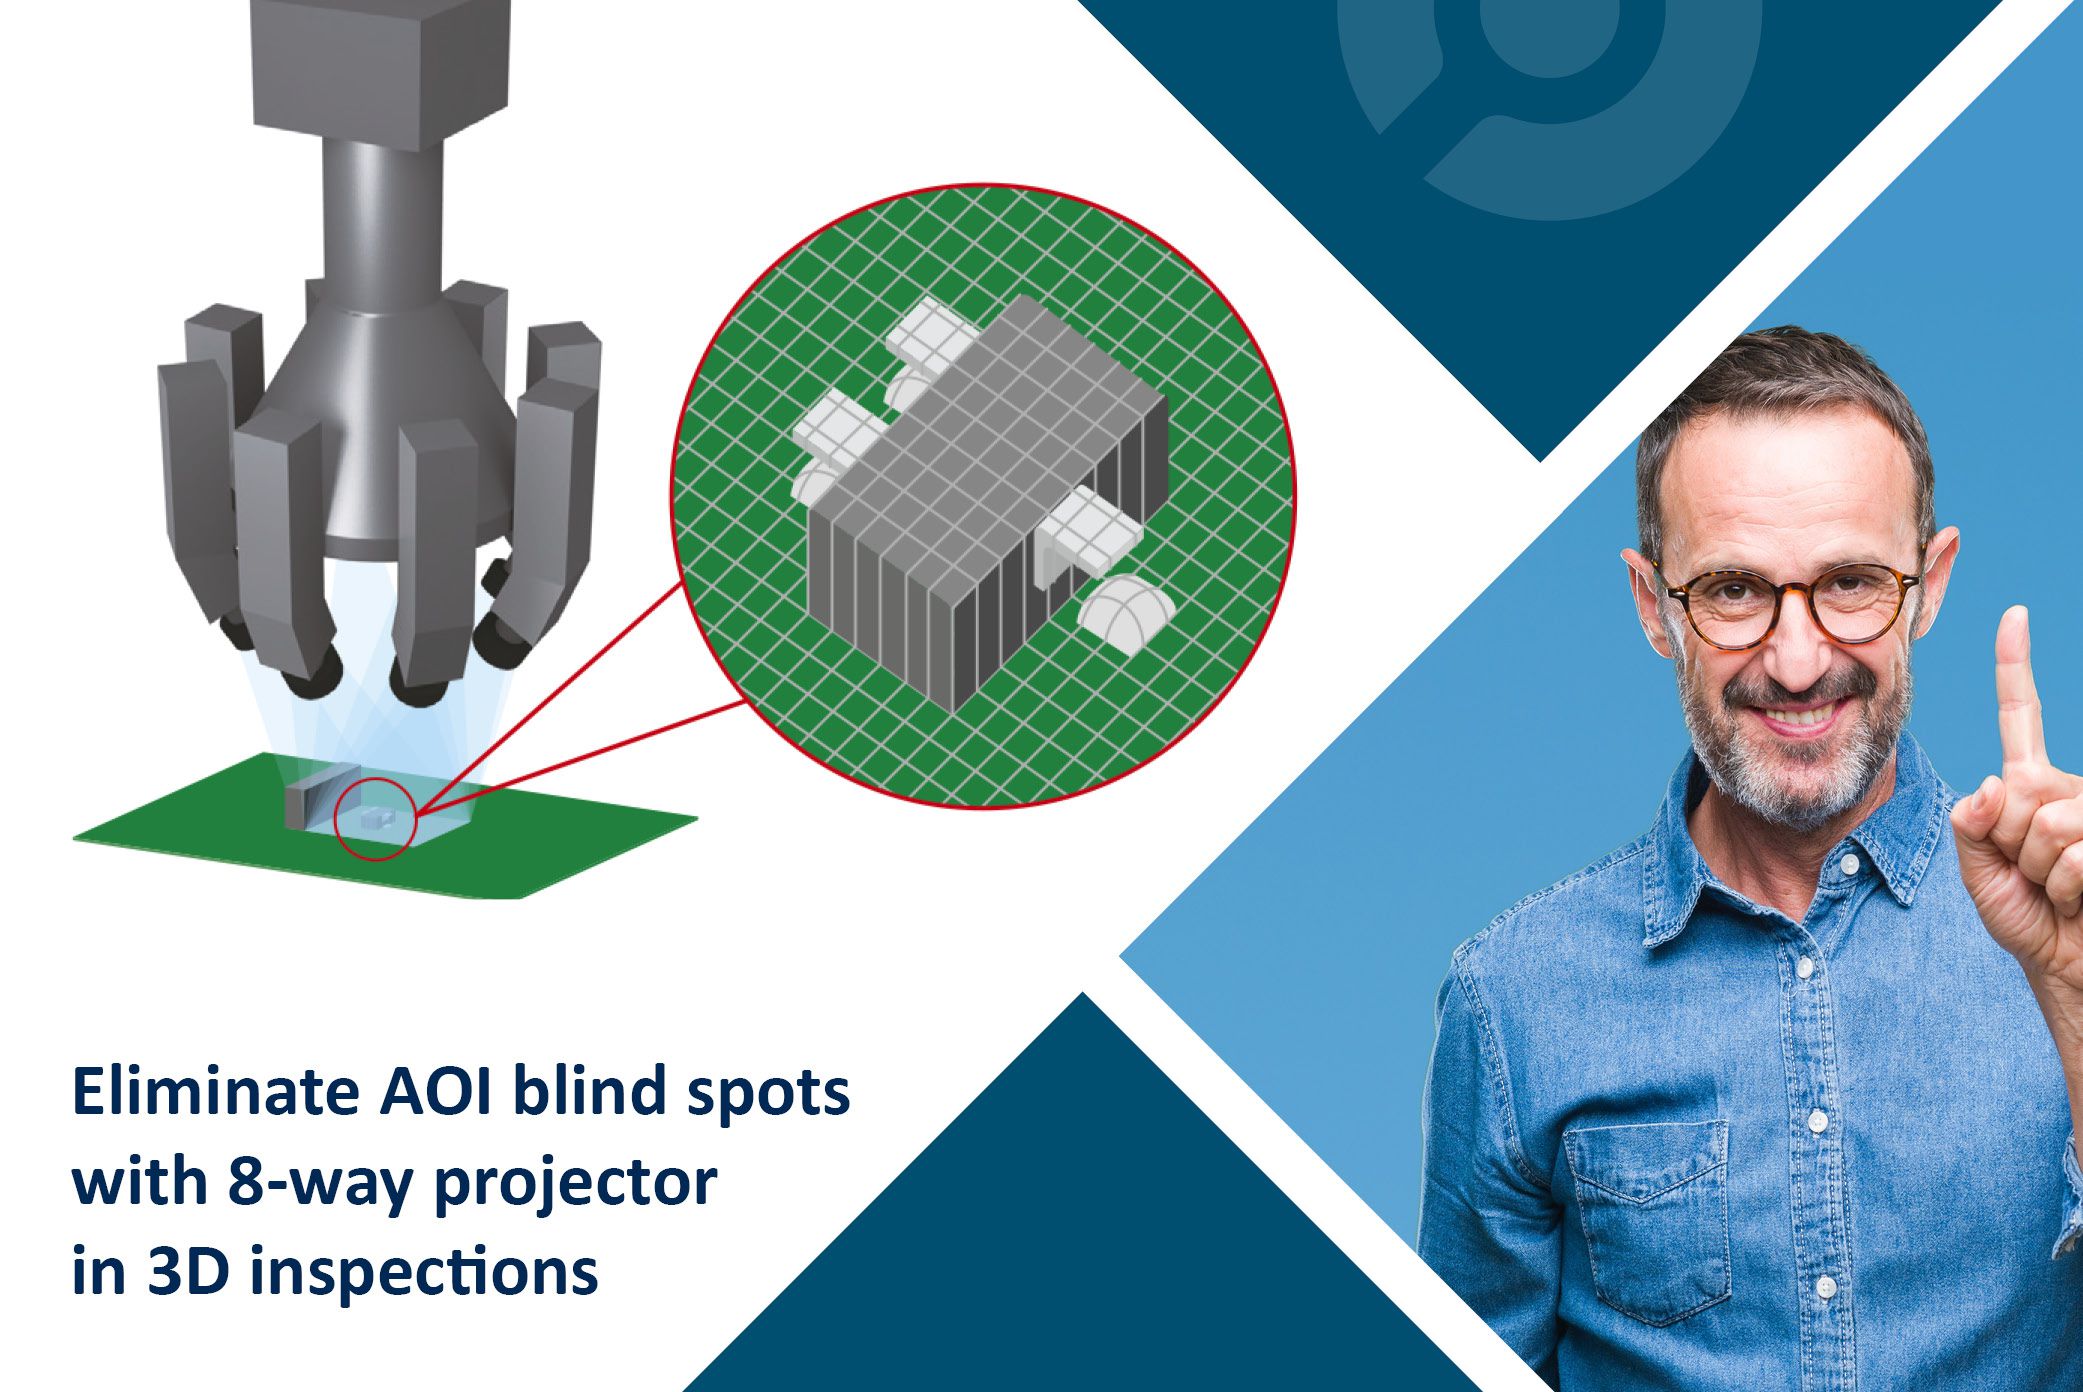 Eliminate AOI blind spots with 8-way projector in 3D AOI inspections